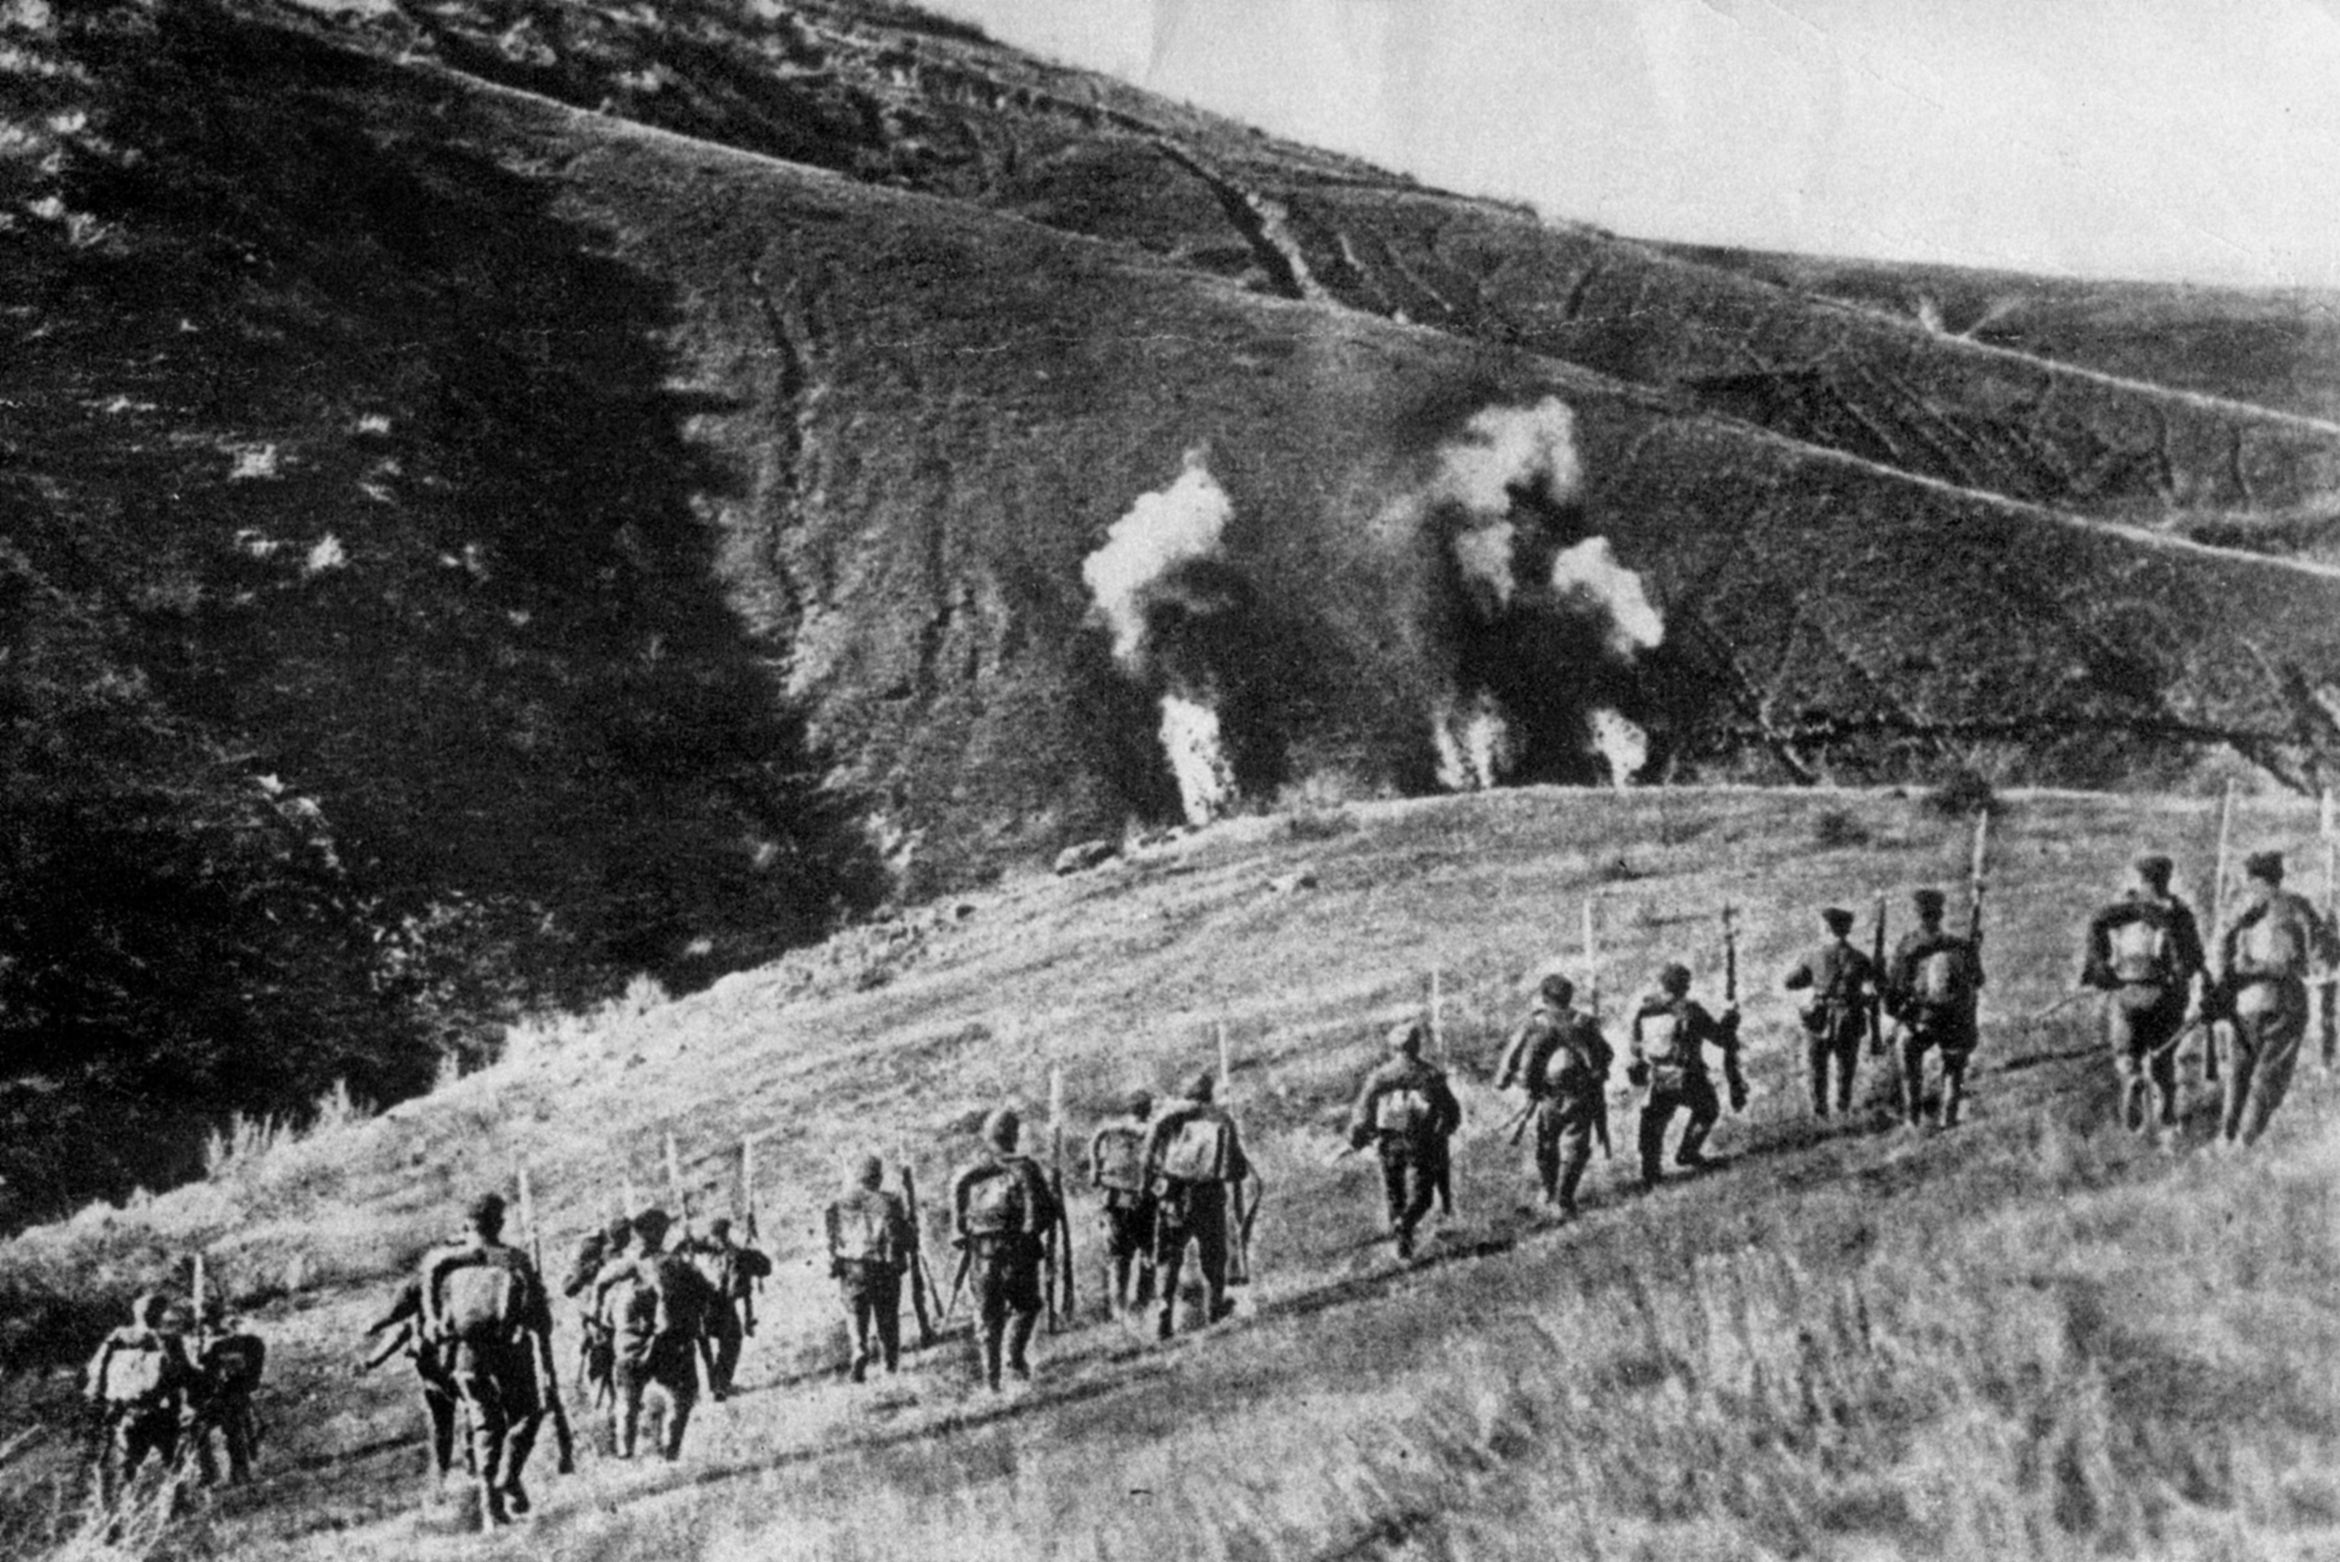 Bulgarian troops attack a Serbian position in October 1915. The Serbian Army was driven out of the country, ending up in Salonika. The British and French then took on the Bulgarians with no success, leaving the Salonika front unmoved until the end of 1918. Note the Serbian line to the right of the smoke.